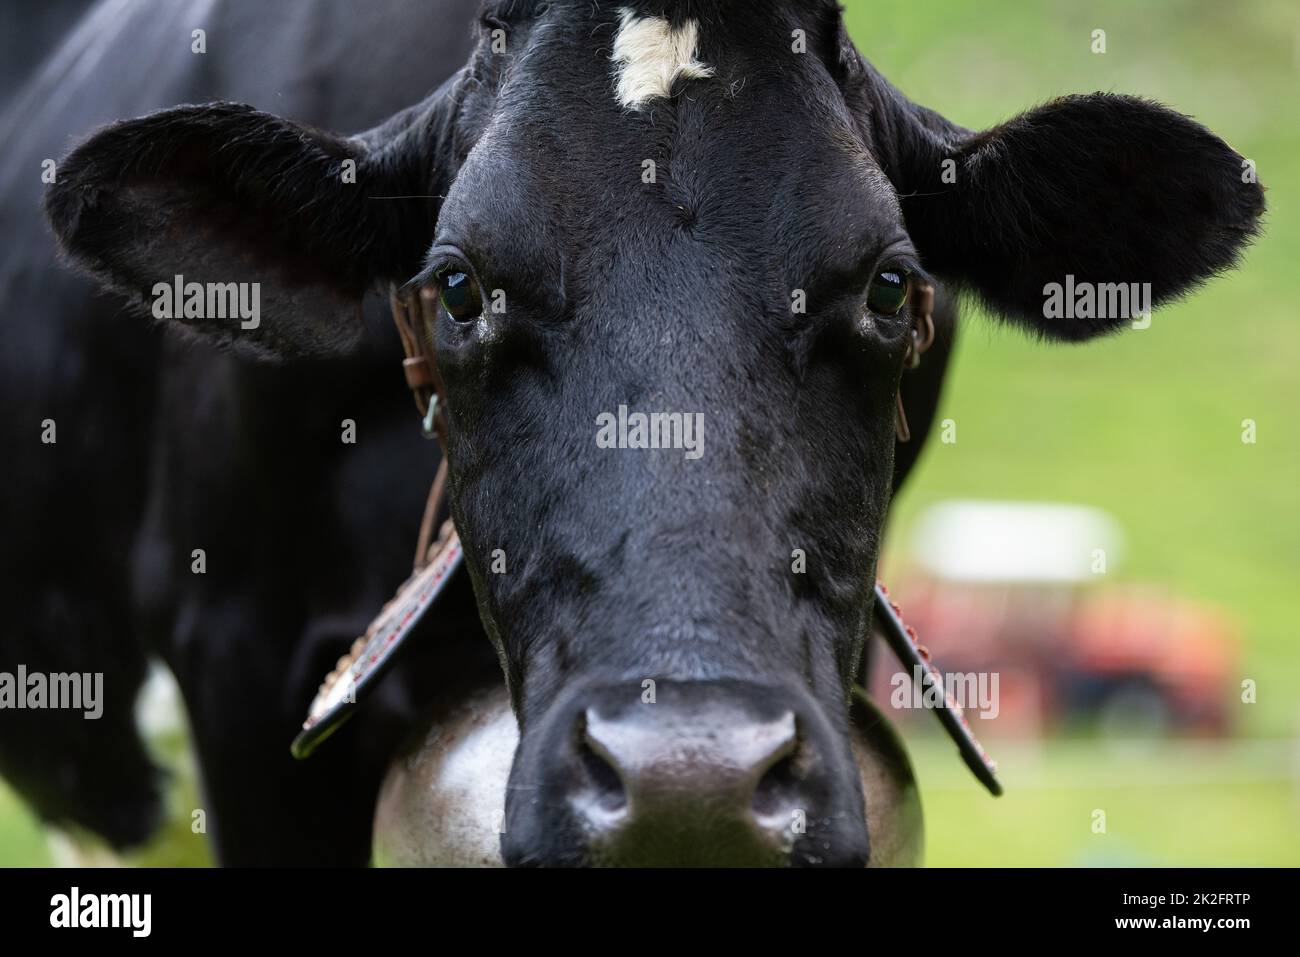 Agriculture situation with a black cow Stock Photo